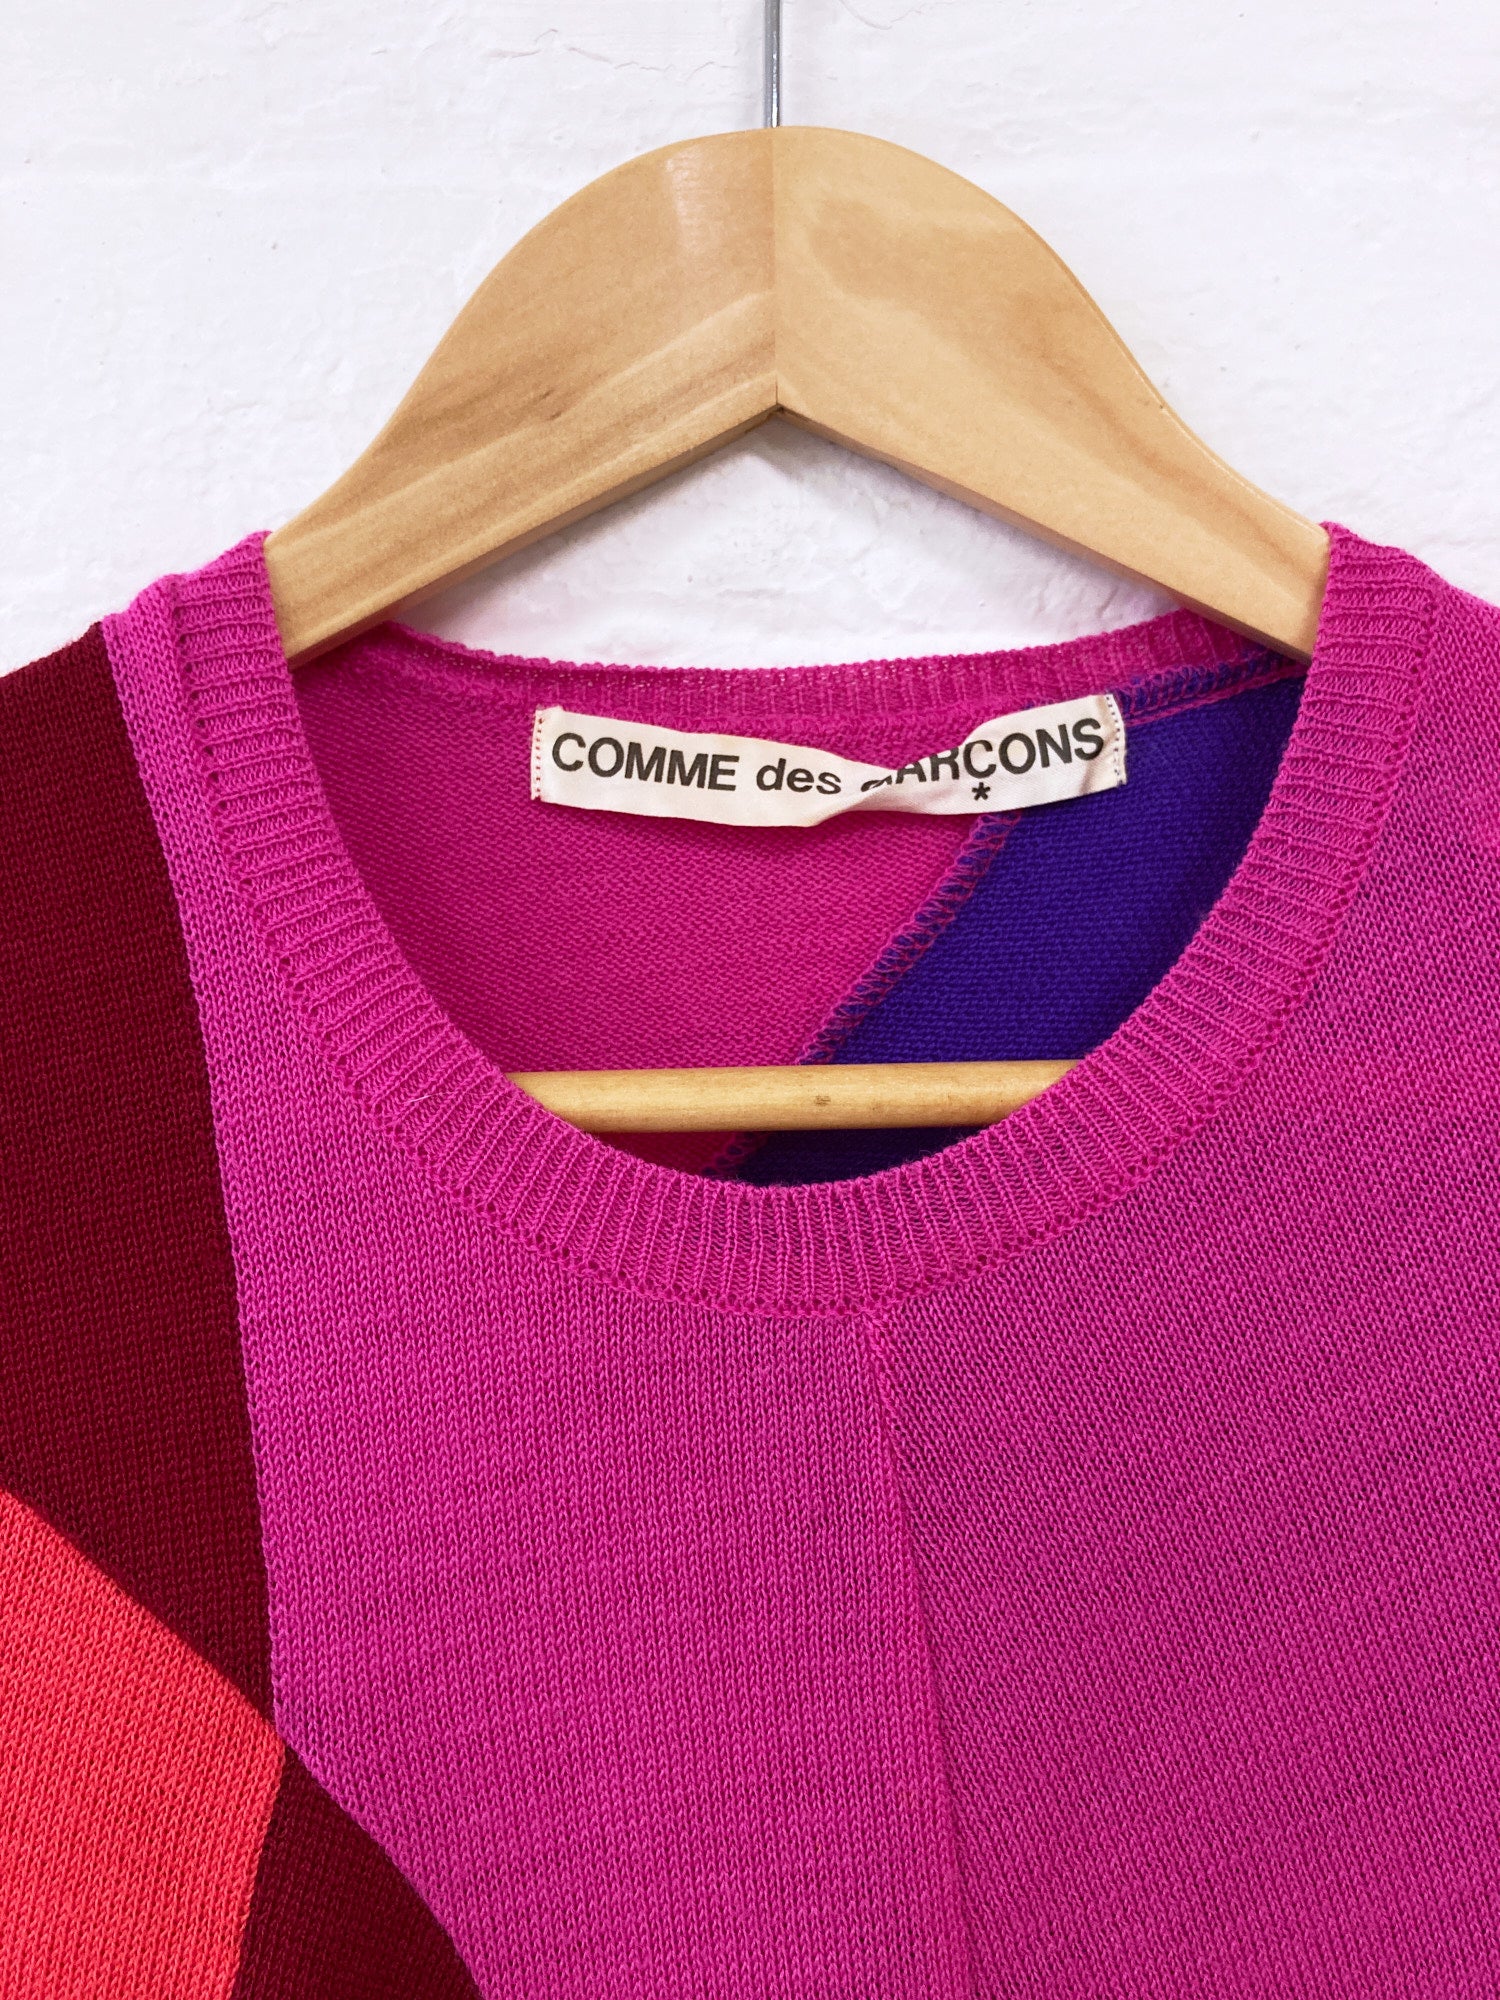 Comme des Garcons SS1996 multicolour wool paneled short sleeve sweater